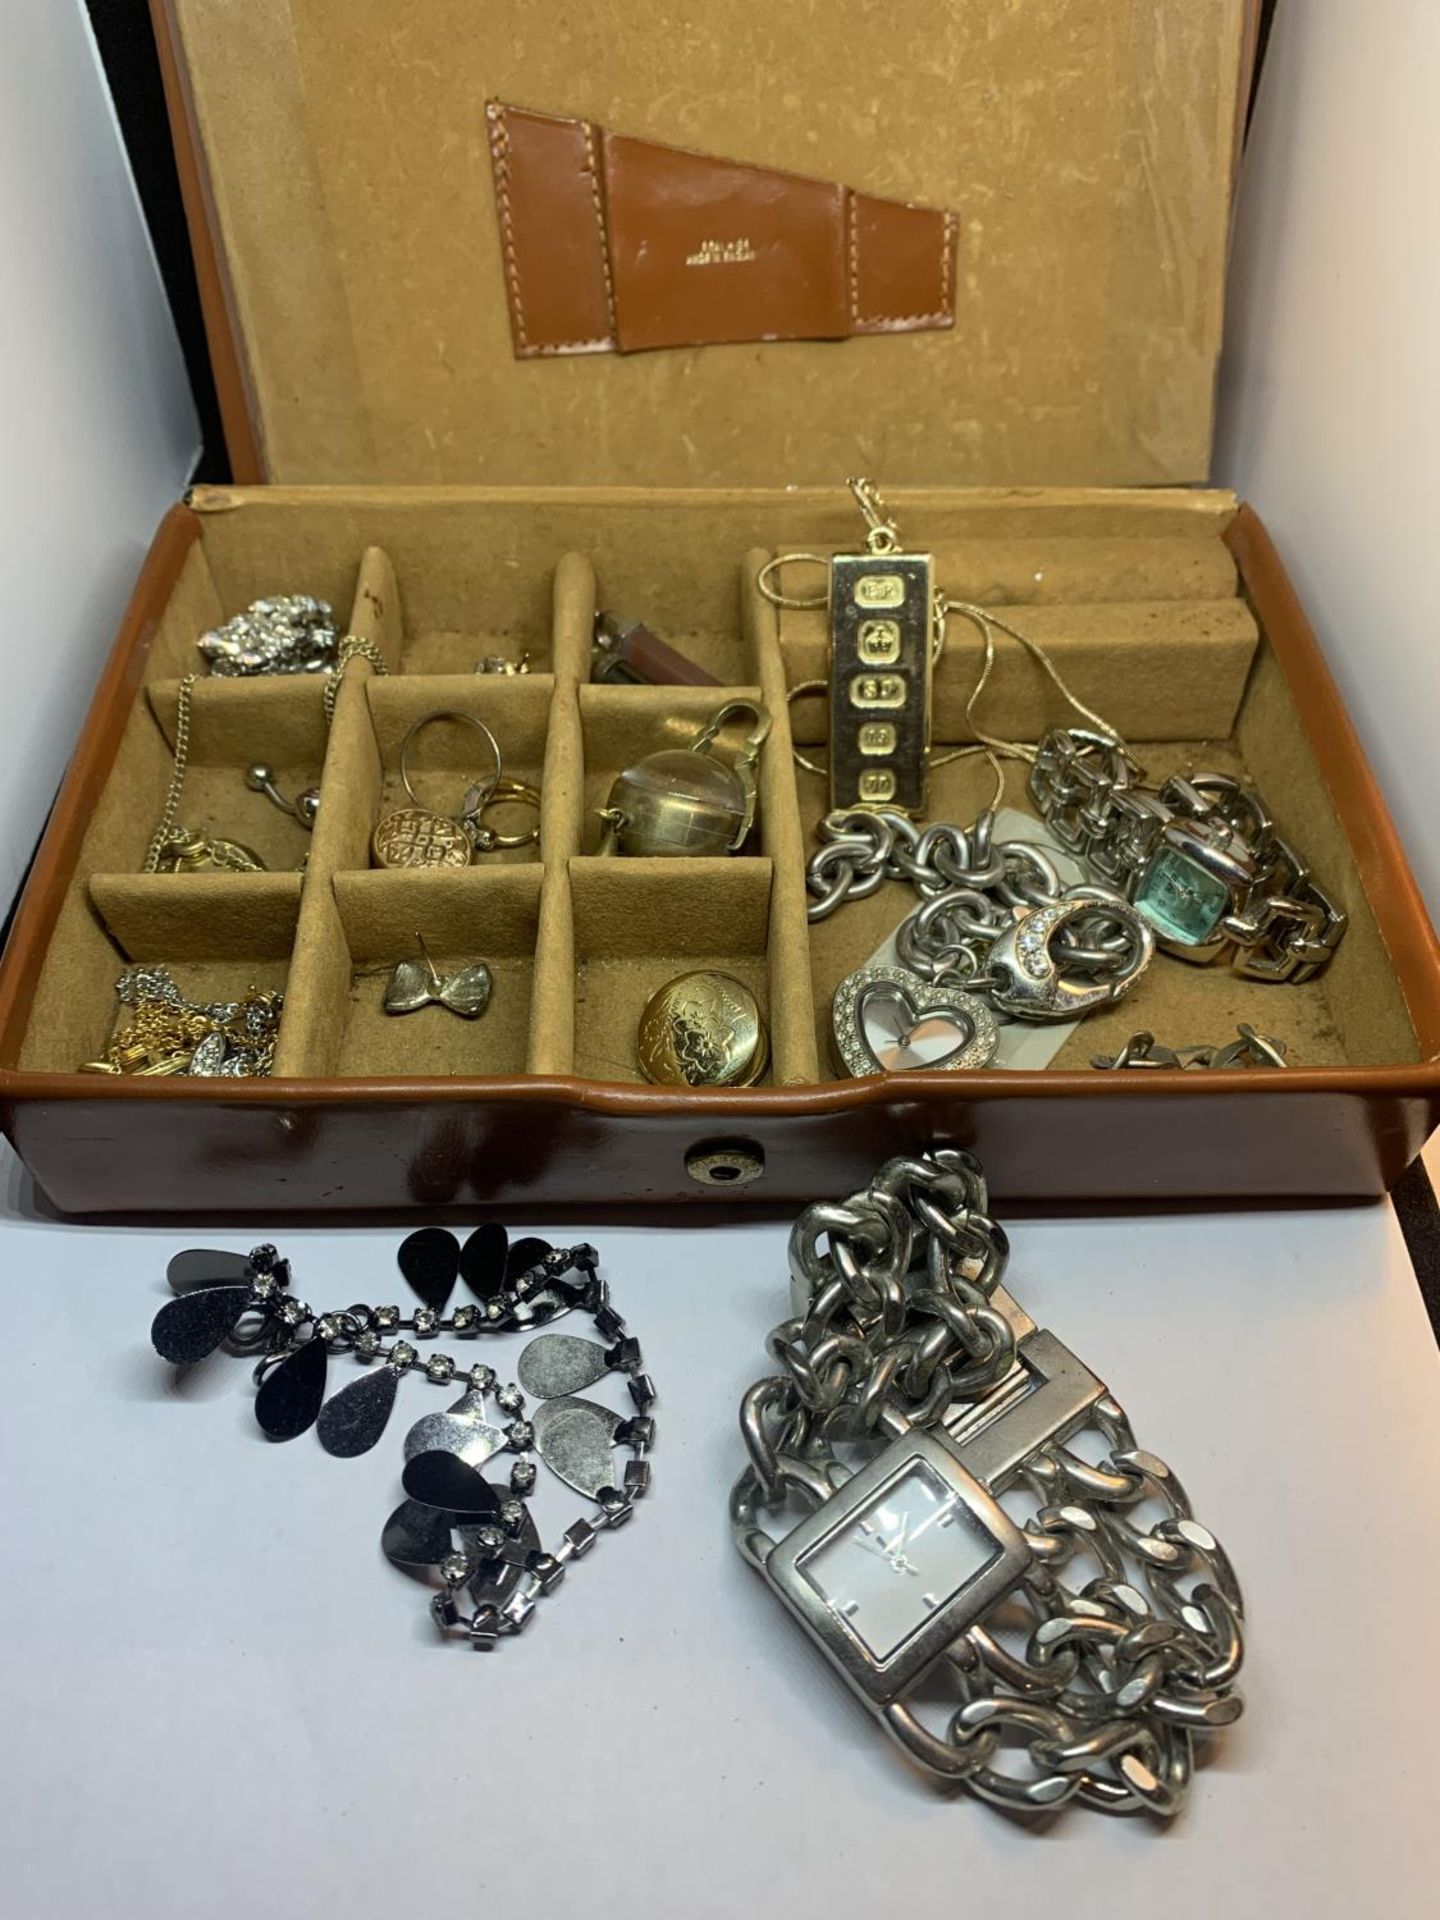 A BROWN LEATHER JEWELLERY BOX CONTAINING COSTUME JEWELLERY AND WATCHES